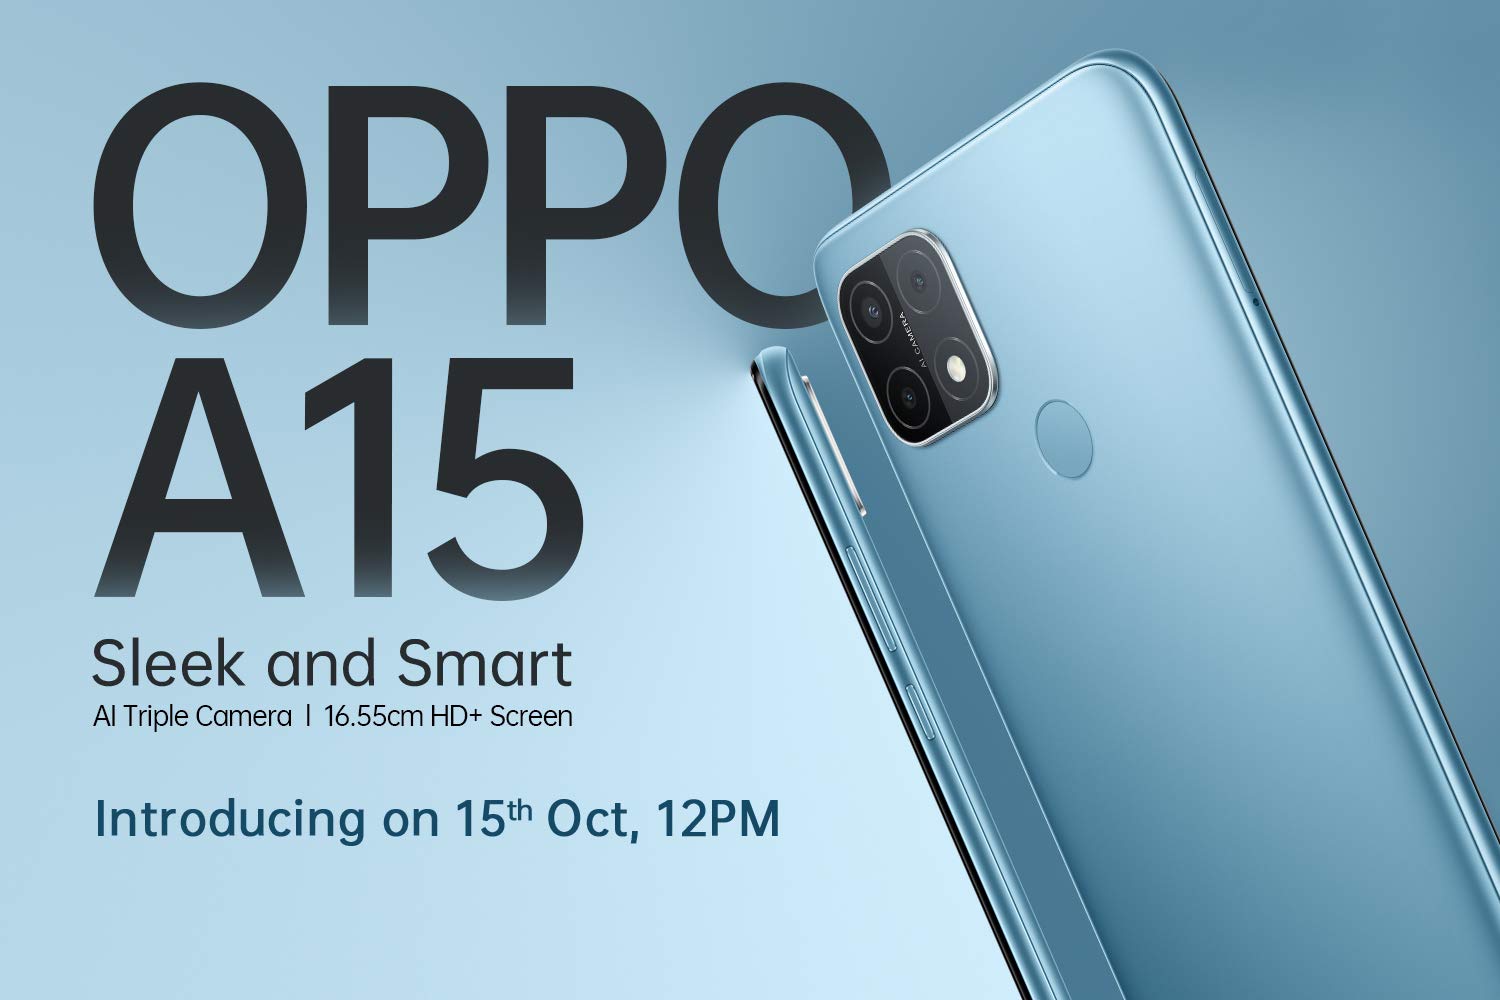 Oppo A15 confirmed to launch in India on October 15